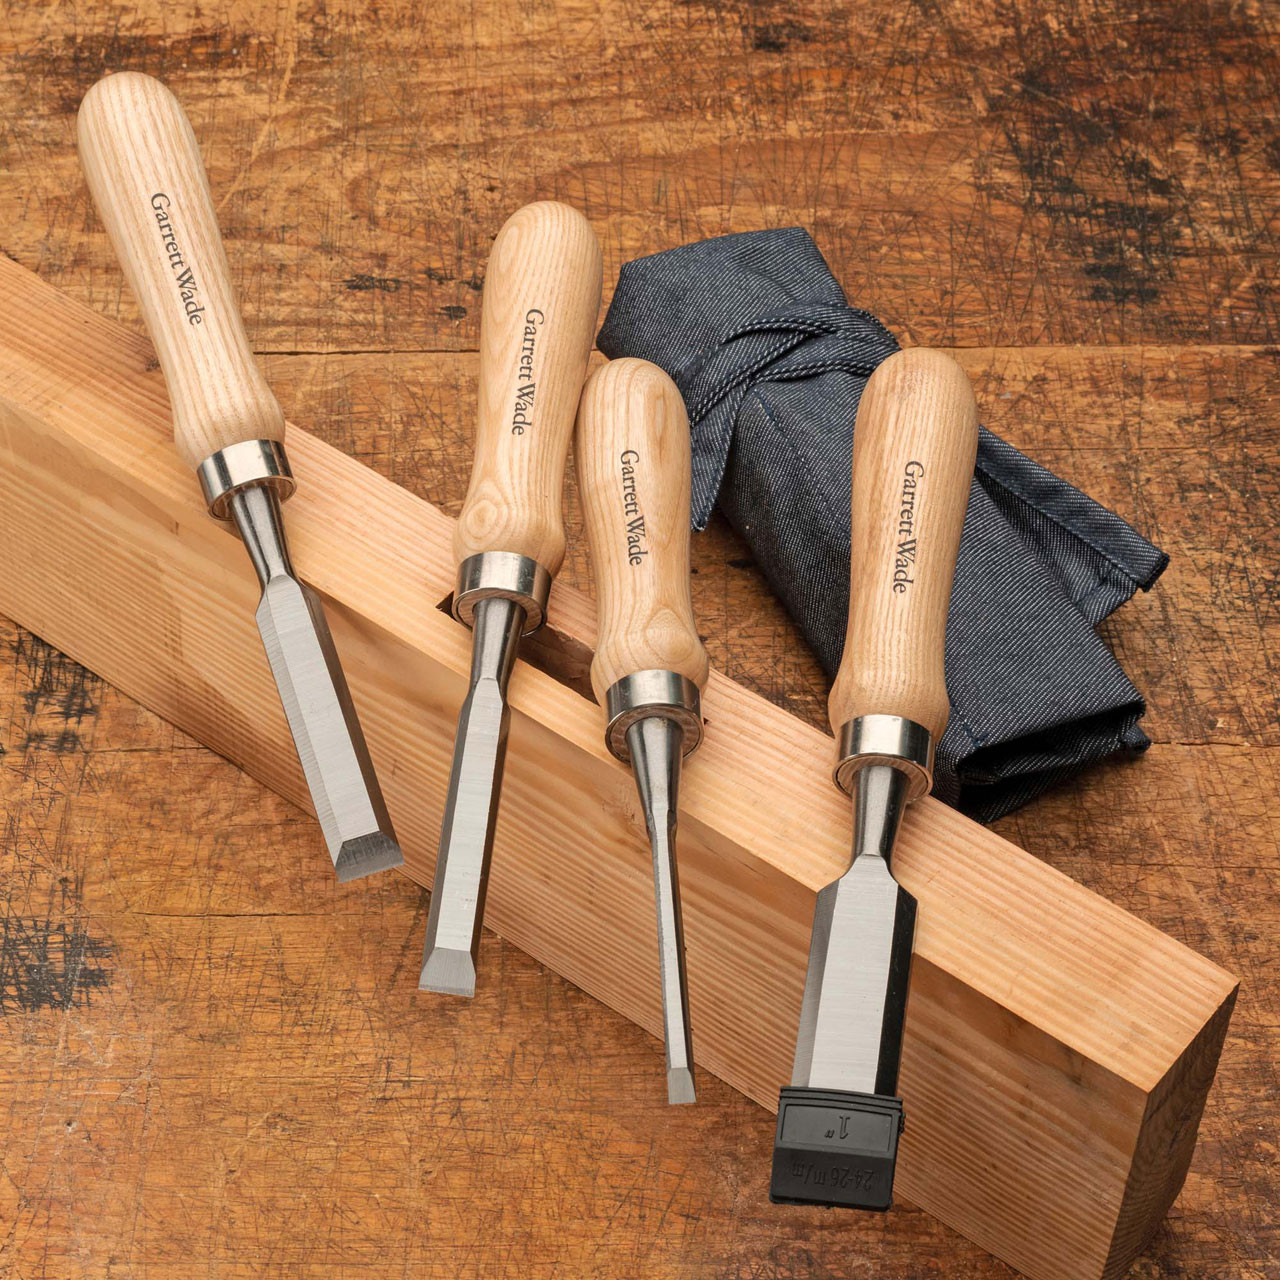 Four Chisel Set - ¼, ½, ¾, &1 - Overall Length 9 - RC Hardness 57-59 by Garrett Wade